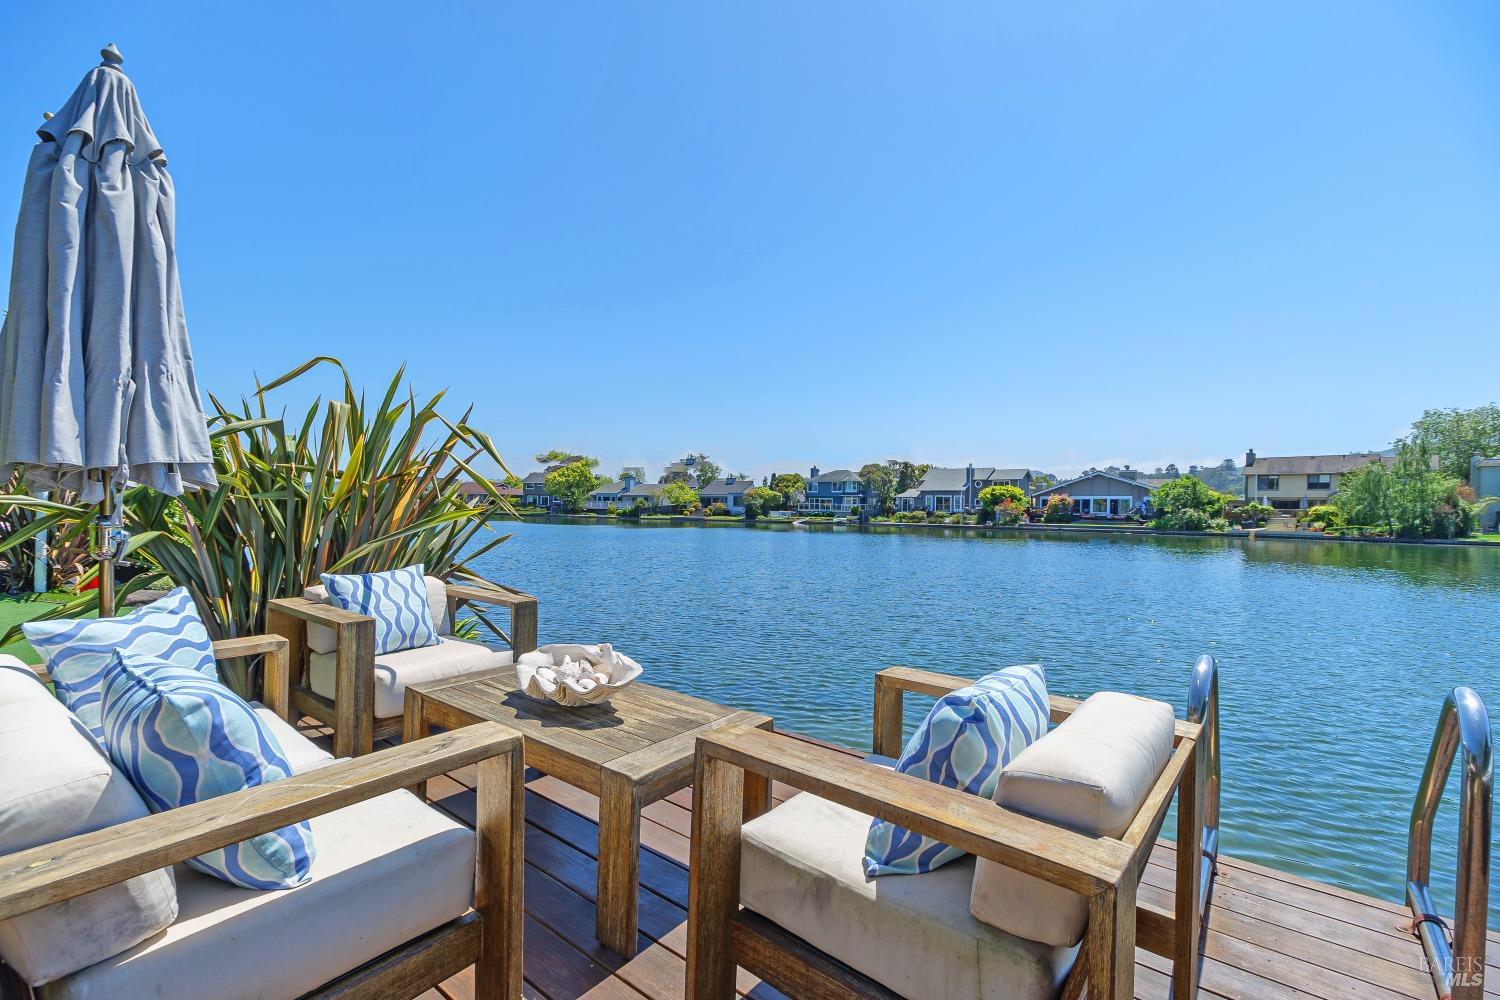 Absolutely stunning remodeled and expanded solar powered paradise, perfectly positioned on one of the most spectacular, sunny, south facing waterfront lots in the entire Marina. Multiple patio doors lead to an outdoor living area, complete with covered patio and full kitchen, built-in spa, outdoor shower, putting green and kayak launch into the lagoon. Relax and gaze at the wide open views of tranquil water, spanning from east to west, capped by photo ready Mt Tam. Quiet setting, yet close enough to walk to schools, parks and shops. Inside is incredible. Natural wood floors, soaring ceilings and a huge open designer kitchen/dining area overlooking the lagoon and hills. Add in the wood burning fireplace and this truly defines a Great Room. Primary Br/Ba is on the main floor, on the water, along with 2 Br's + full bath + powder room. Inside the finished garage is one of TWO laundry areas, plus new furnace, A/C and water heater. Upstairs boasts an enormous family room with built in flat screen and audio components + deck with glass rail, offering views to the north, 1 more Br + a large home office, new full bath and 2nd laundry room. Clean packet on file. NO sloping floors, thanks to extensive permitted foundation and structural improvements. Floating Lily Pad in garage included!